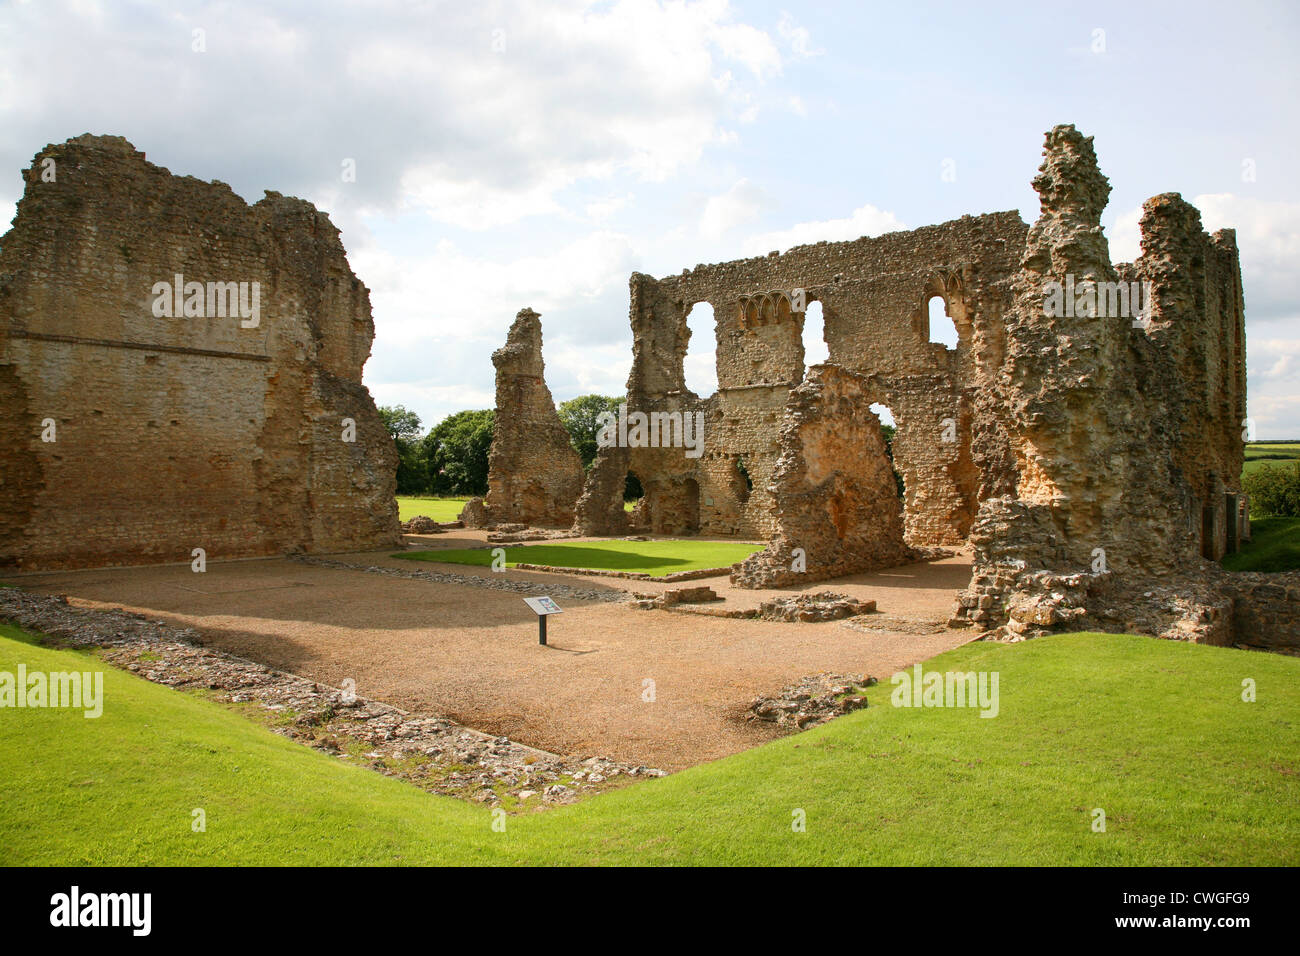 England Dorset Sherborne Ruins of Old Sherborne Castle dating back to 1107 AD Stock Photo